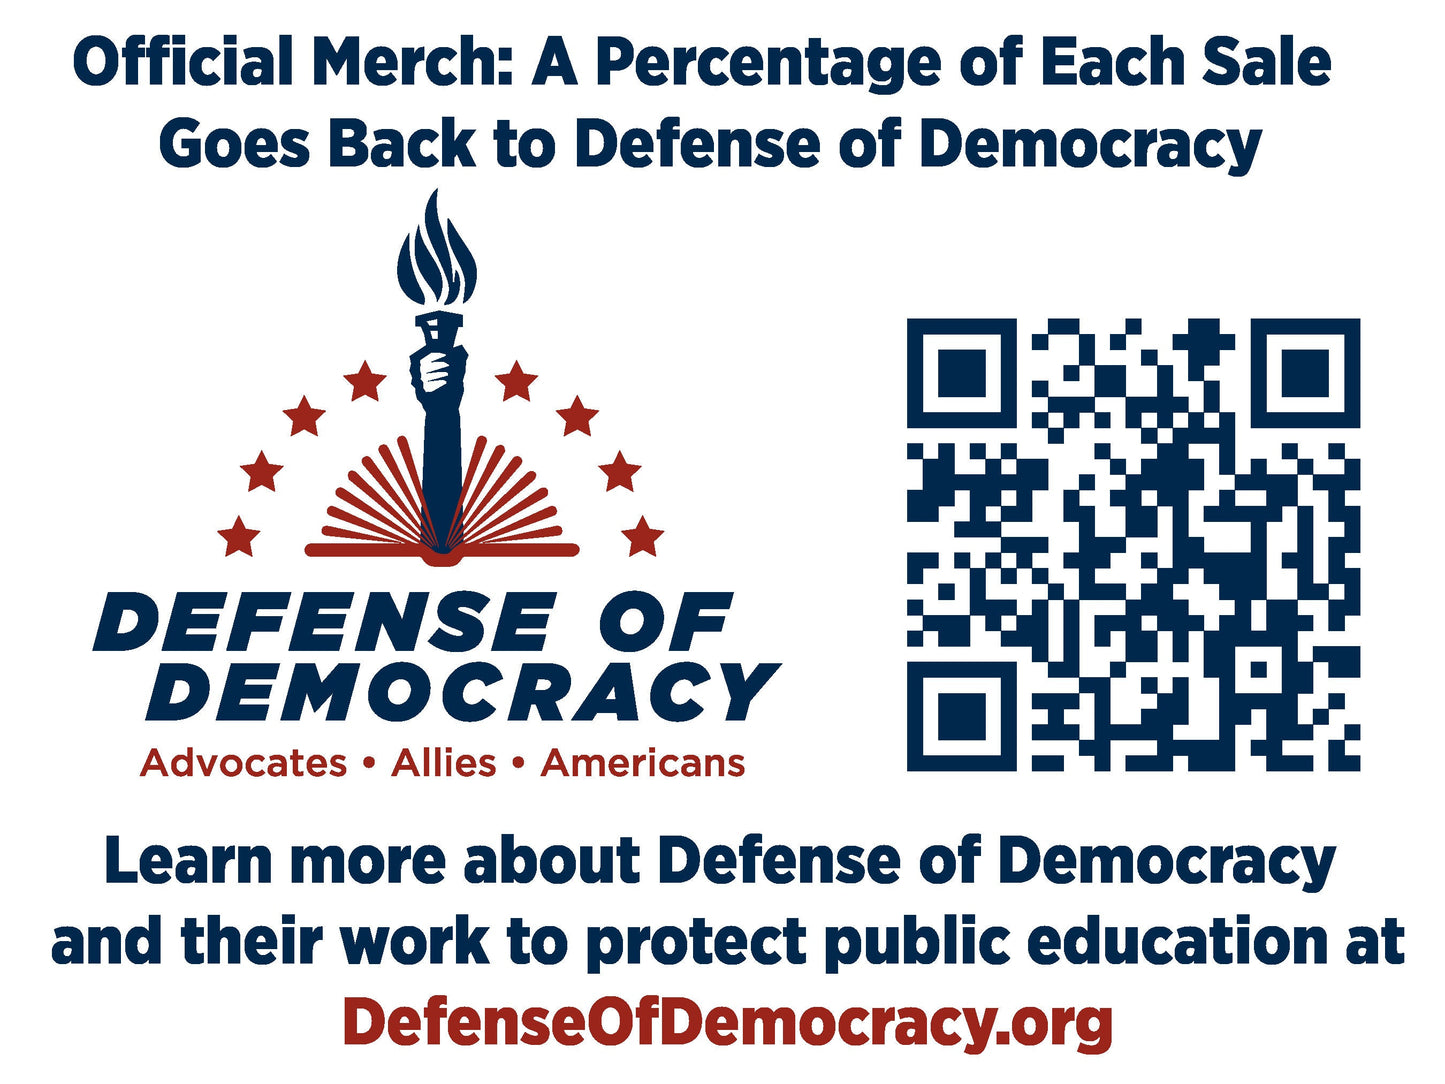 Men's / Unisex Hooded T-shirt - Defense of Democracy - Choose your logo and colors!